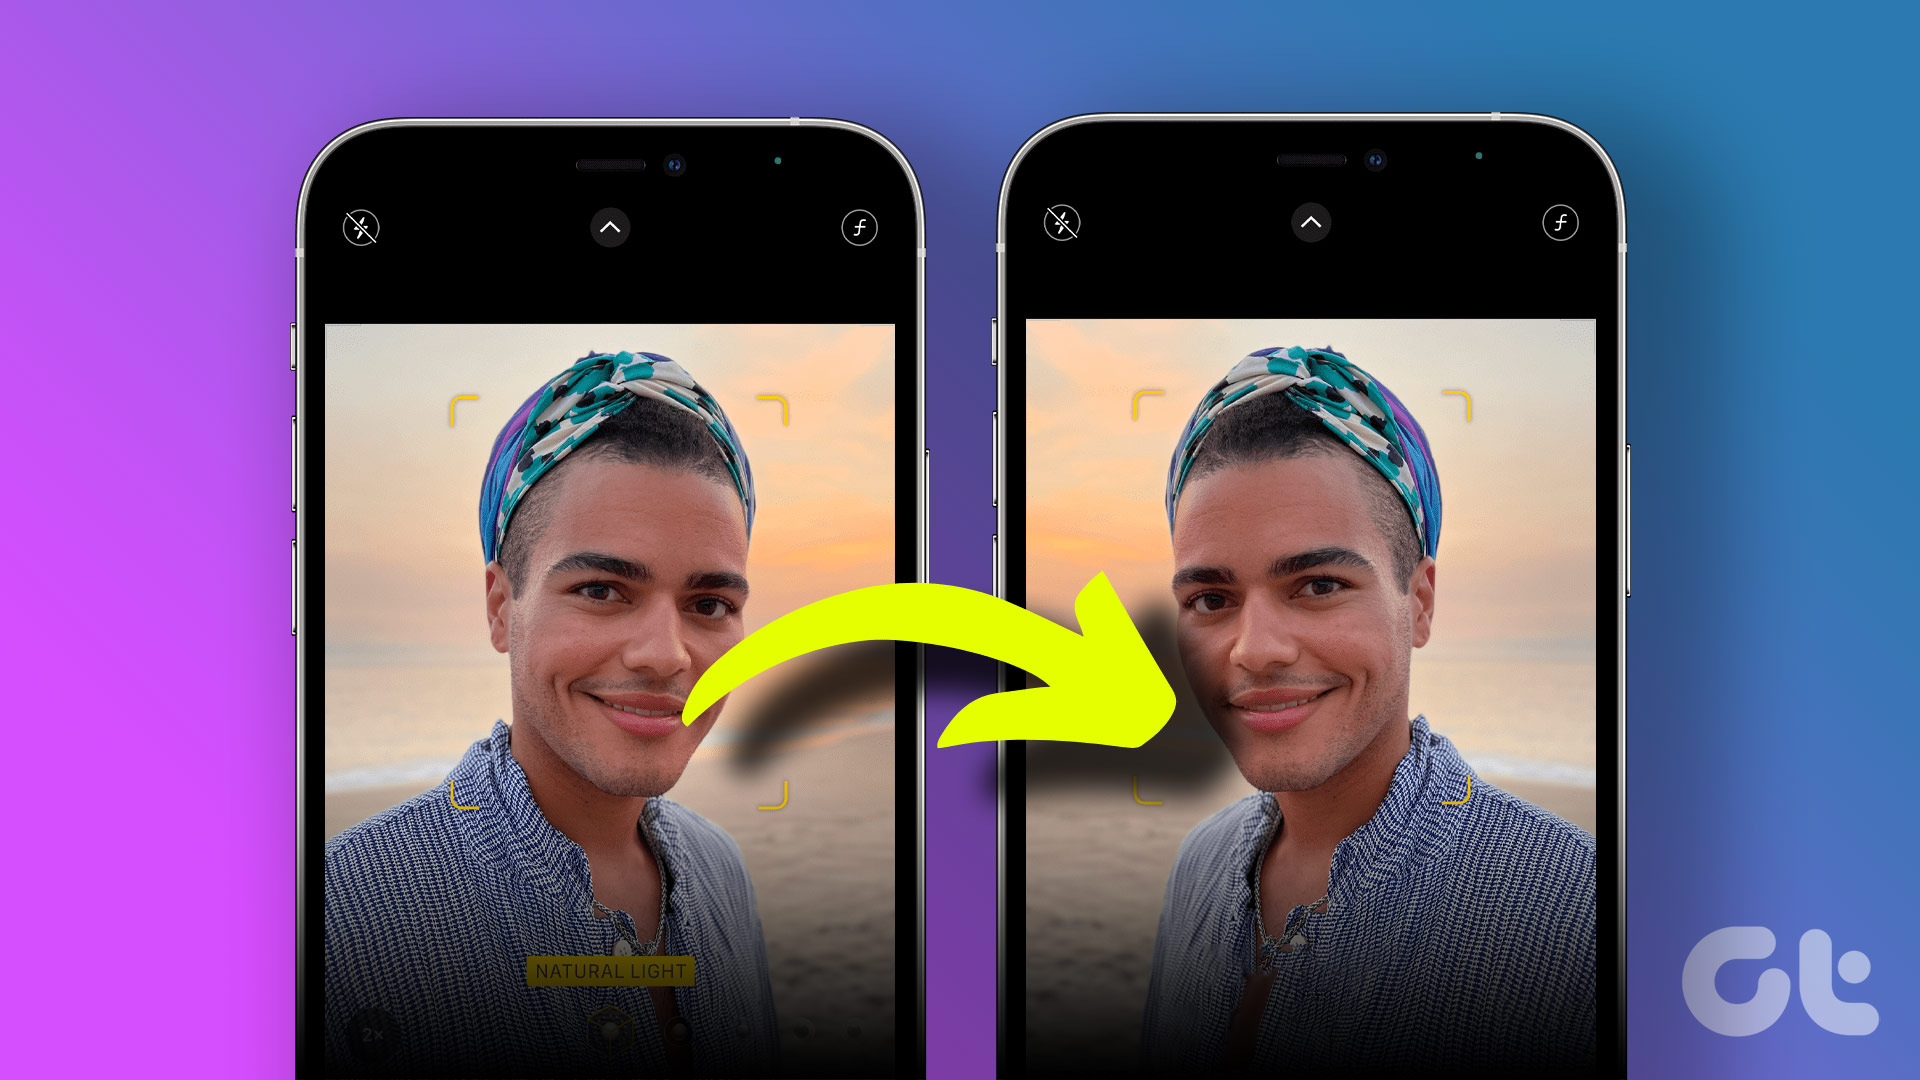 How to Invert or Flip a Photo on iPhone